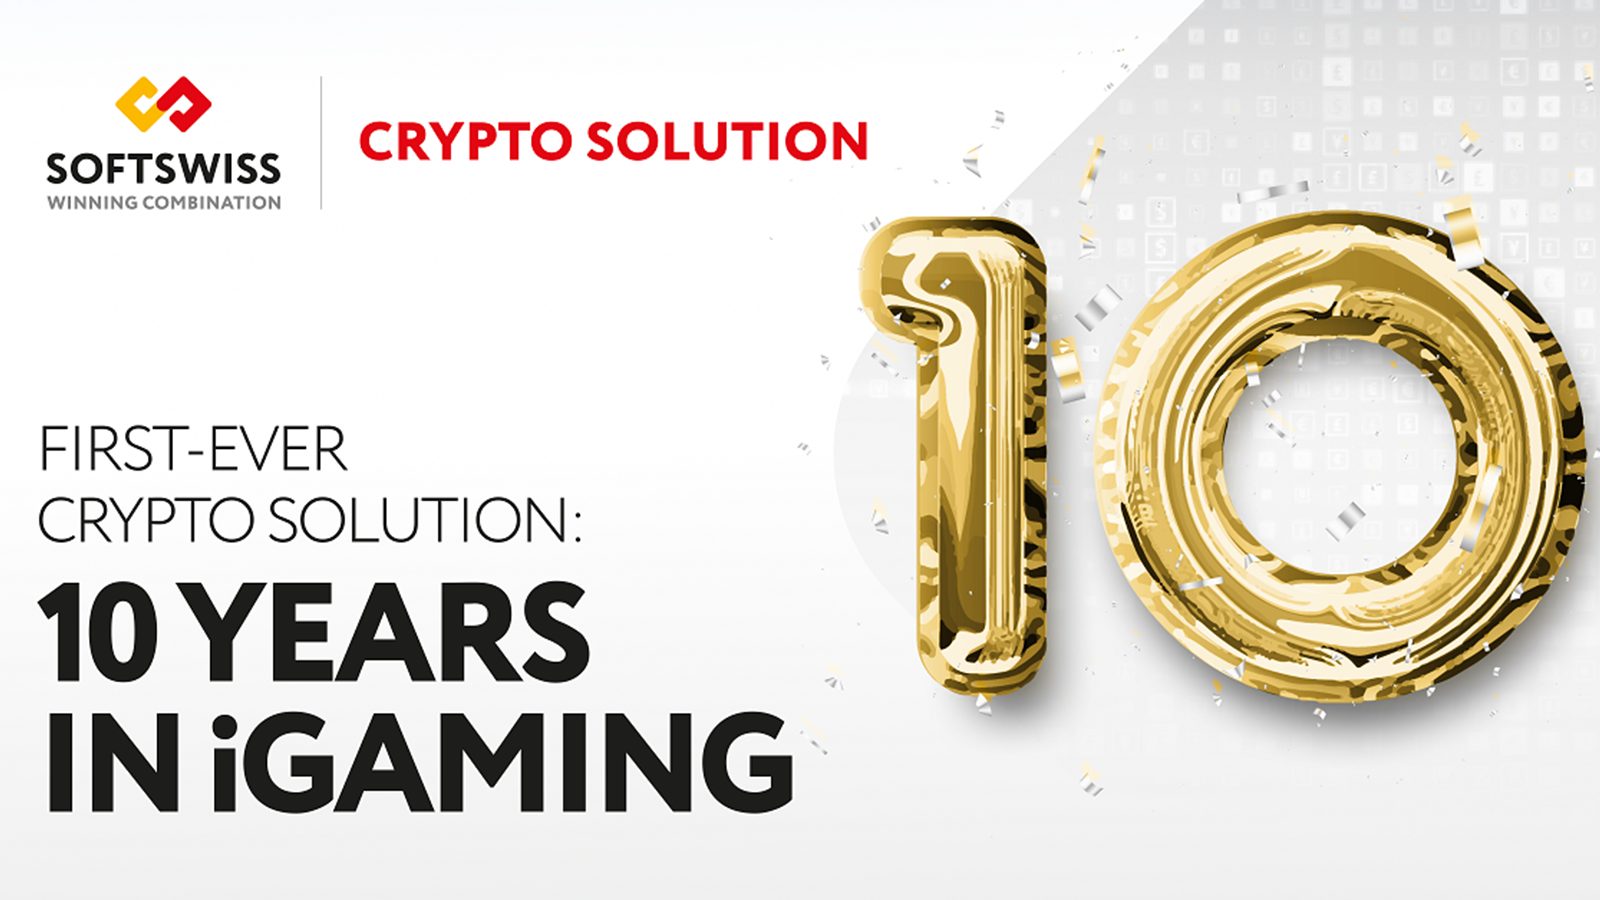 SOFTSWISS - Crypto Integration in iGaming